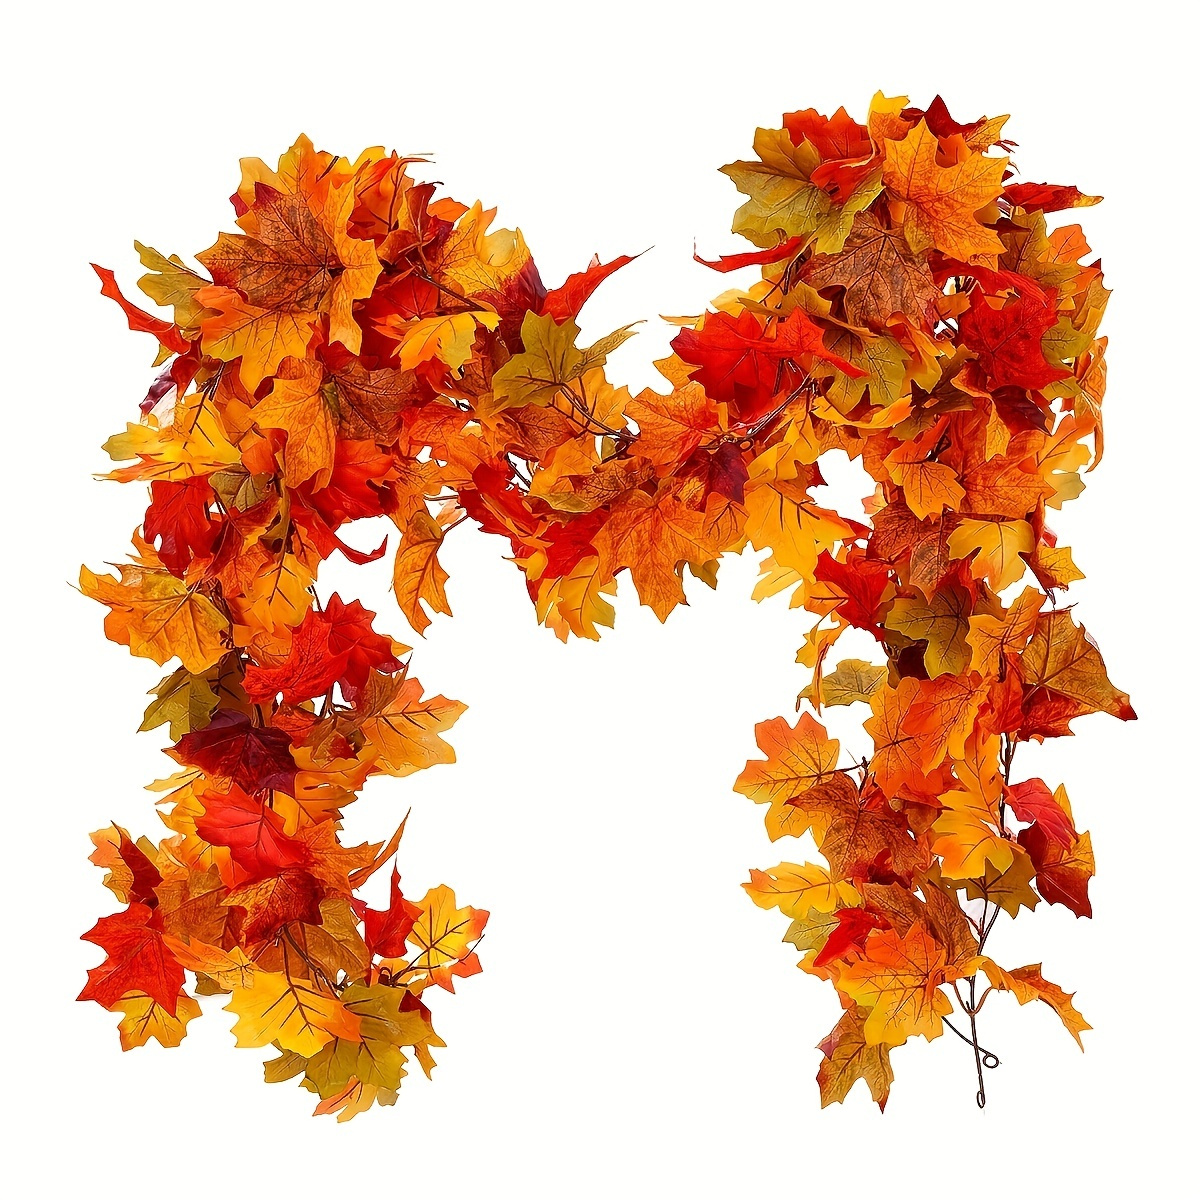 

2pcs Artificial Fall Maple Leaf Garland, Simulation Autumn Leaves Garland For Thanksgiving Halloween Maple Syrup Festivals Wedding Indoor Outdoor Fall Decoration